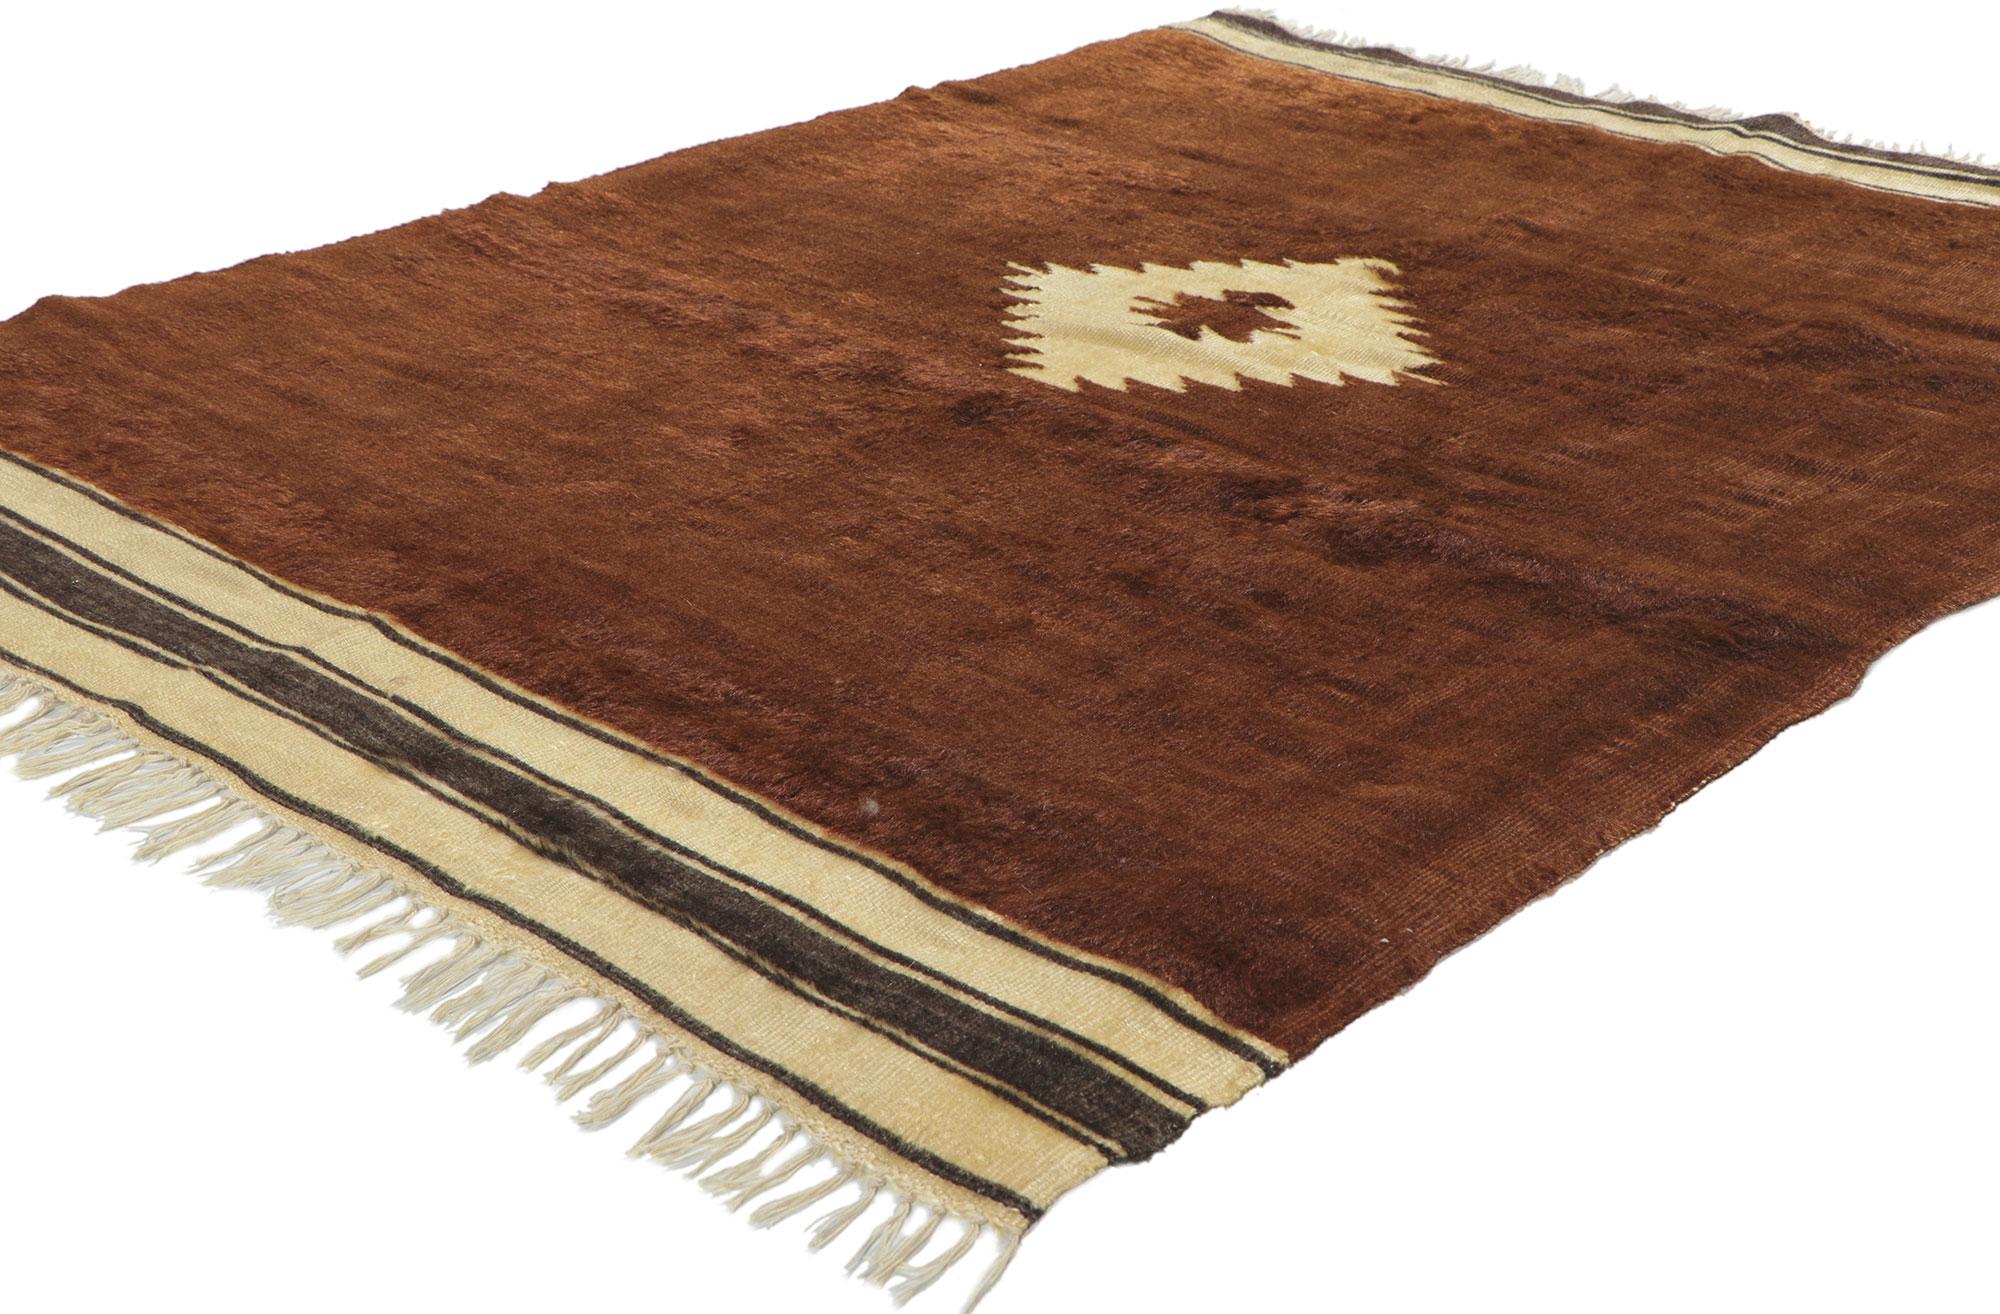 53853 Vintage Turkish Angora Wool Blanket Kilim rug, 03'11 x 05'01. With its shaggy pile, incredible detail and texture, this handwoven Turkish angora kilim rug is a captivating vision of woven beauty. The eye-catching geometric design and earthy